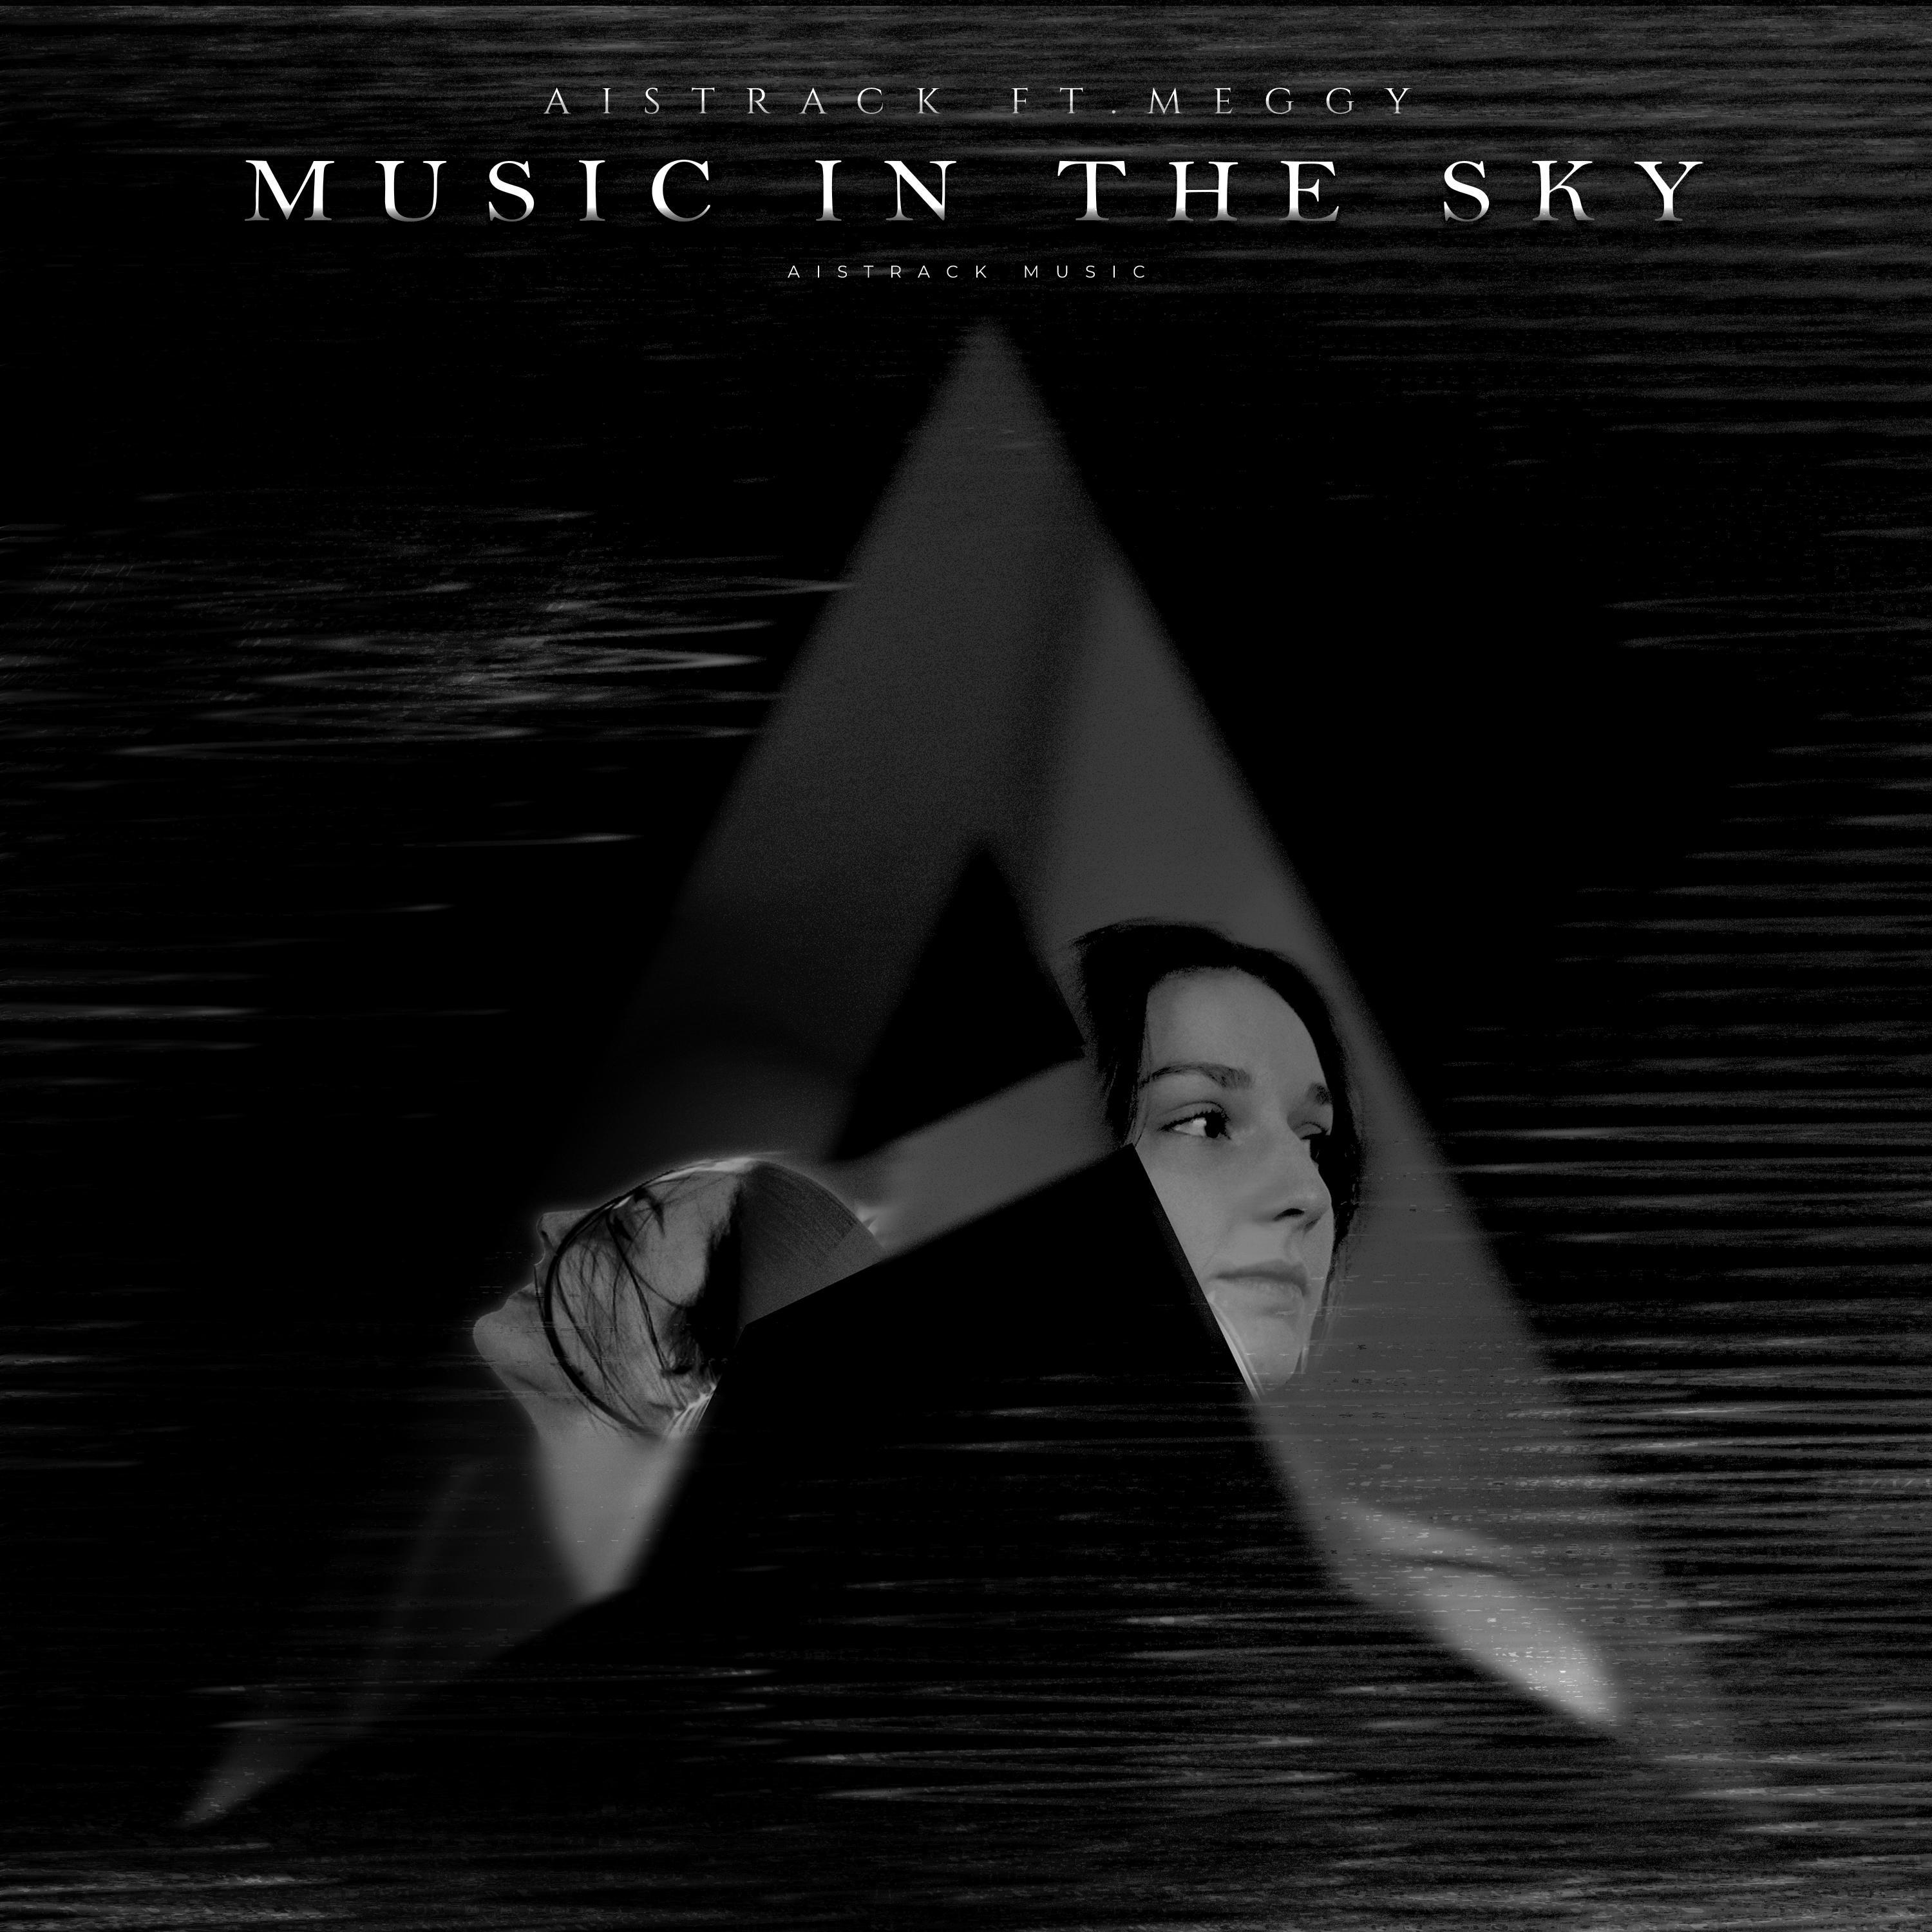 Aistrack - Music in the Sky (feat. Meggy)